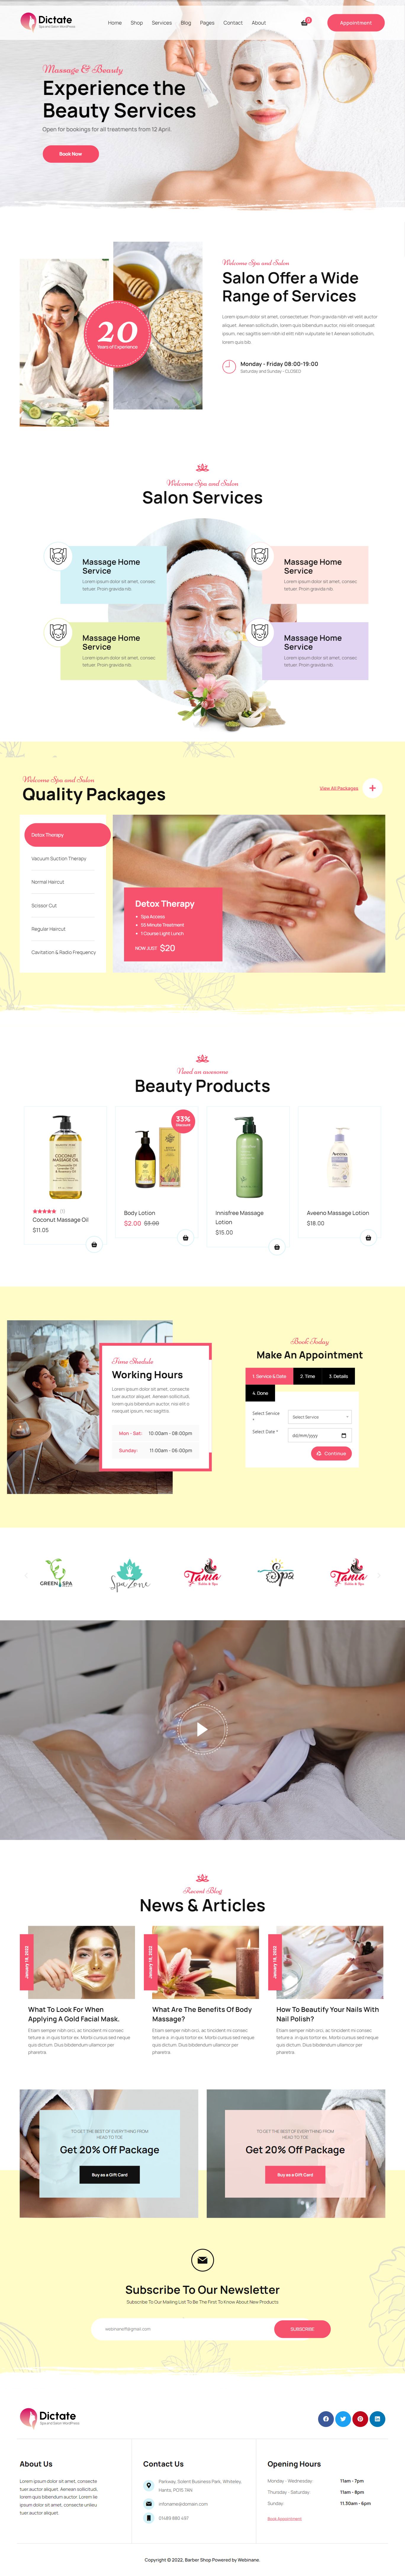 mẫu giao diện website spa dictate